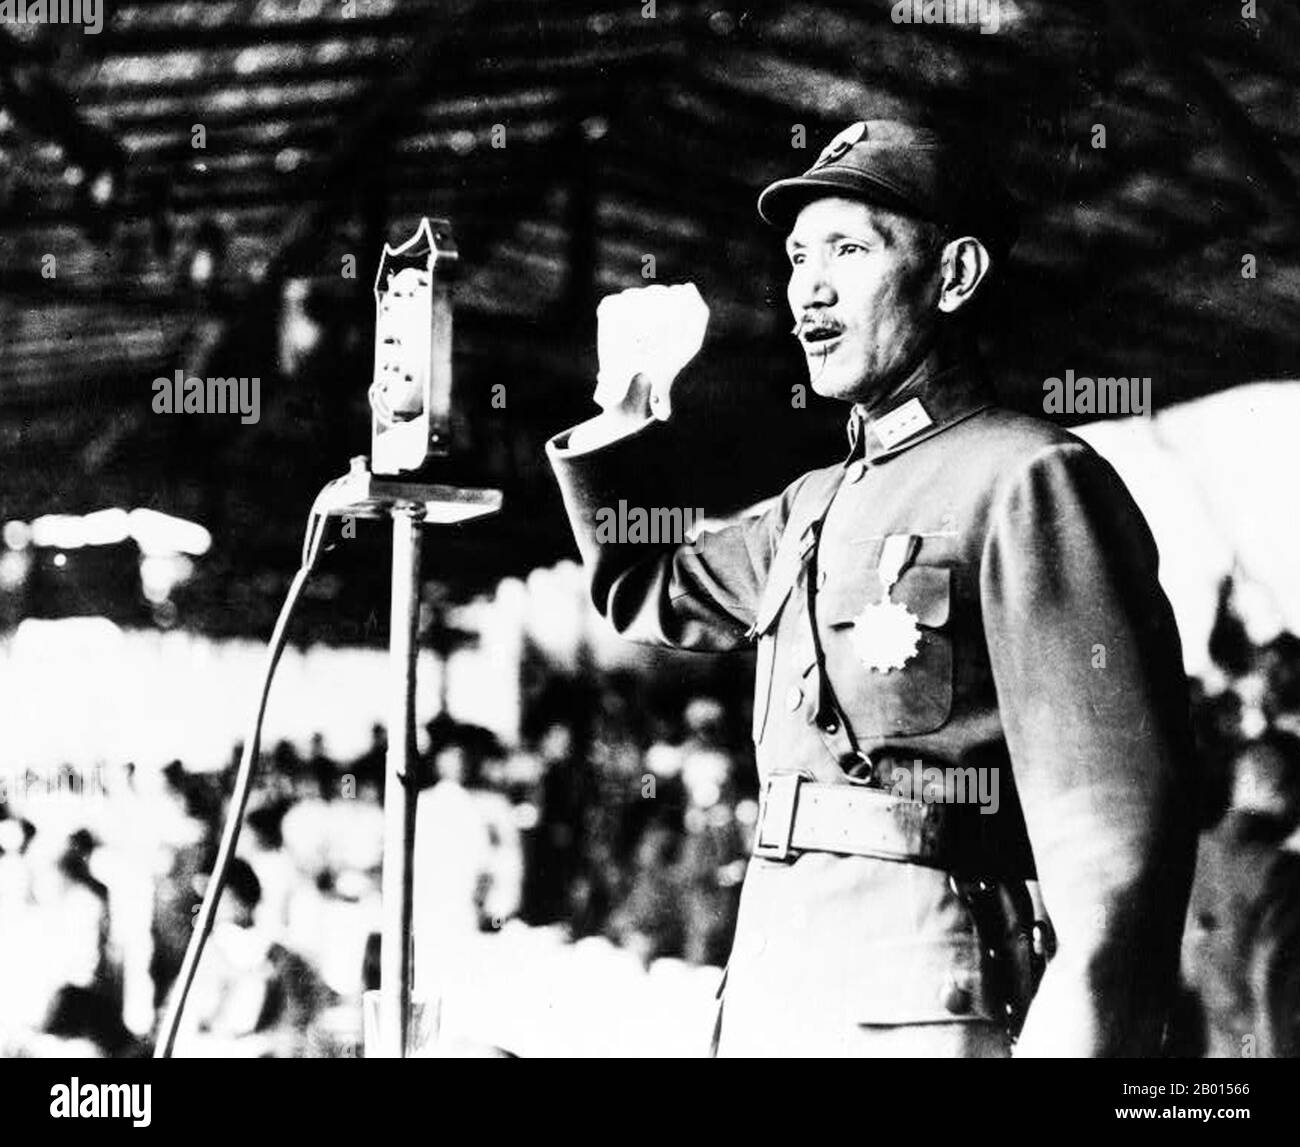 China: General Chiang Kai-shek addressing officer training corps at Hankou, 1940.  Chiang Kai-shek was a political and military leader of 20th century China. He is known as Jiǎng Jièshí or Jiǎng Zhōngzhèng in Mandarin. Chiang was an influential member of the Nationalist Party, the Kuomintang (KMT), and was a close ally of Sun Yat-sen. He became the Commandant of the Kuomintang's Whampoa Military Academy, and took Sun's place as leader of the KMT when Sun died in 1925. In 1926, Chiang led the Northern Expedition to unify the country. Stock Photo